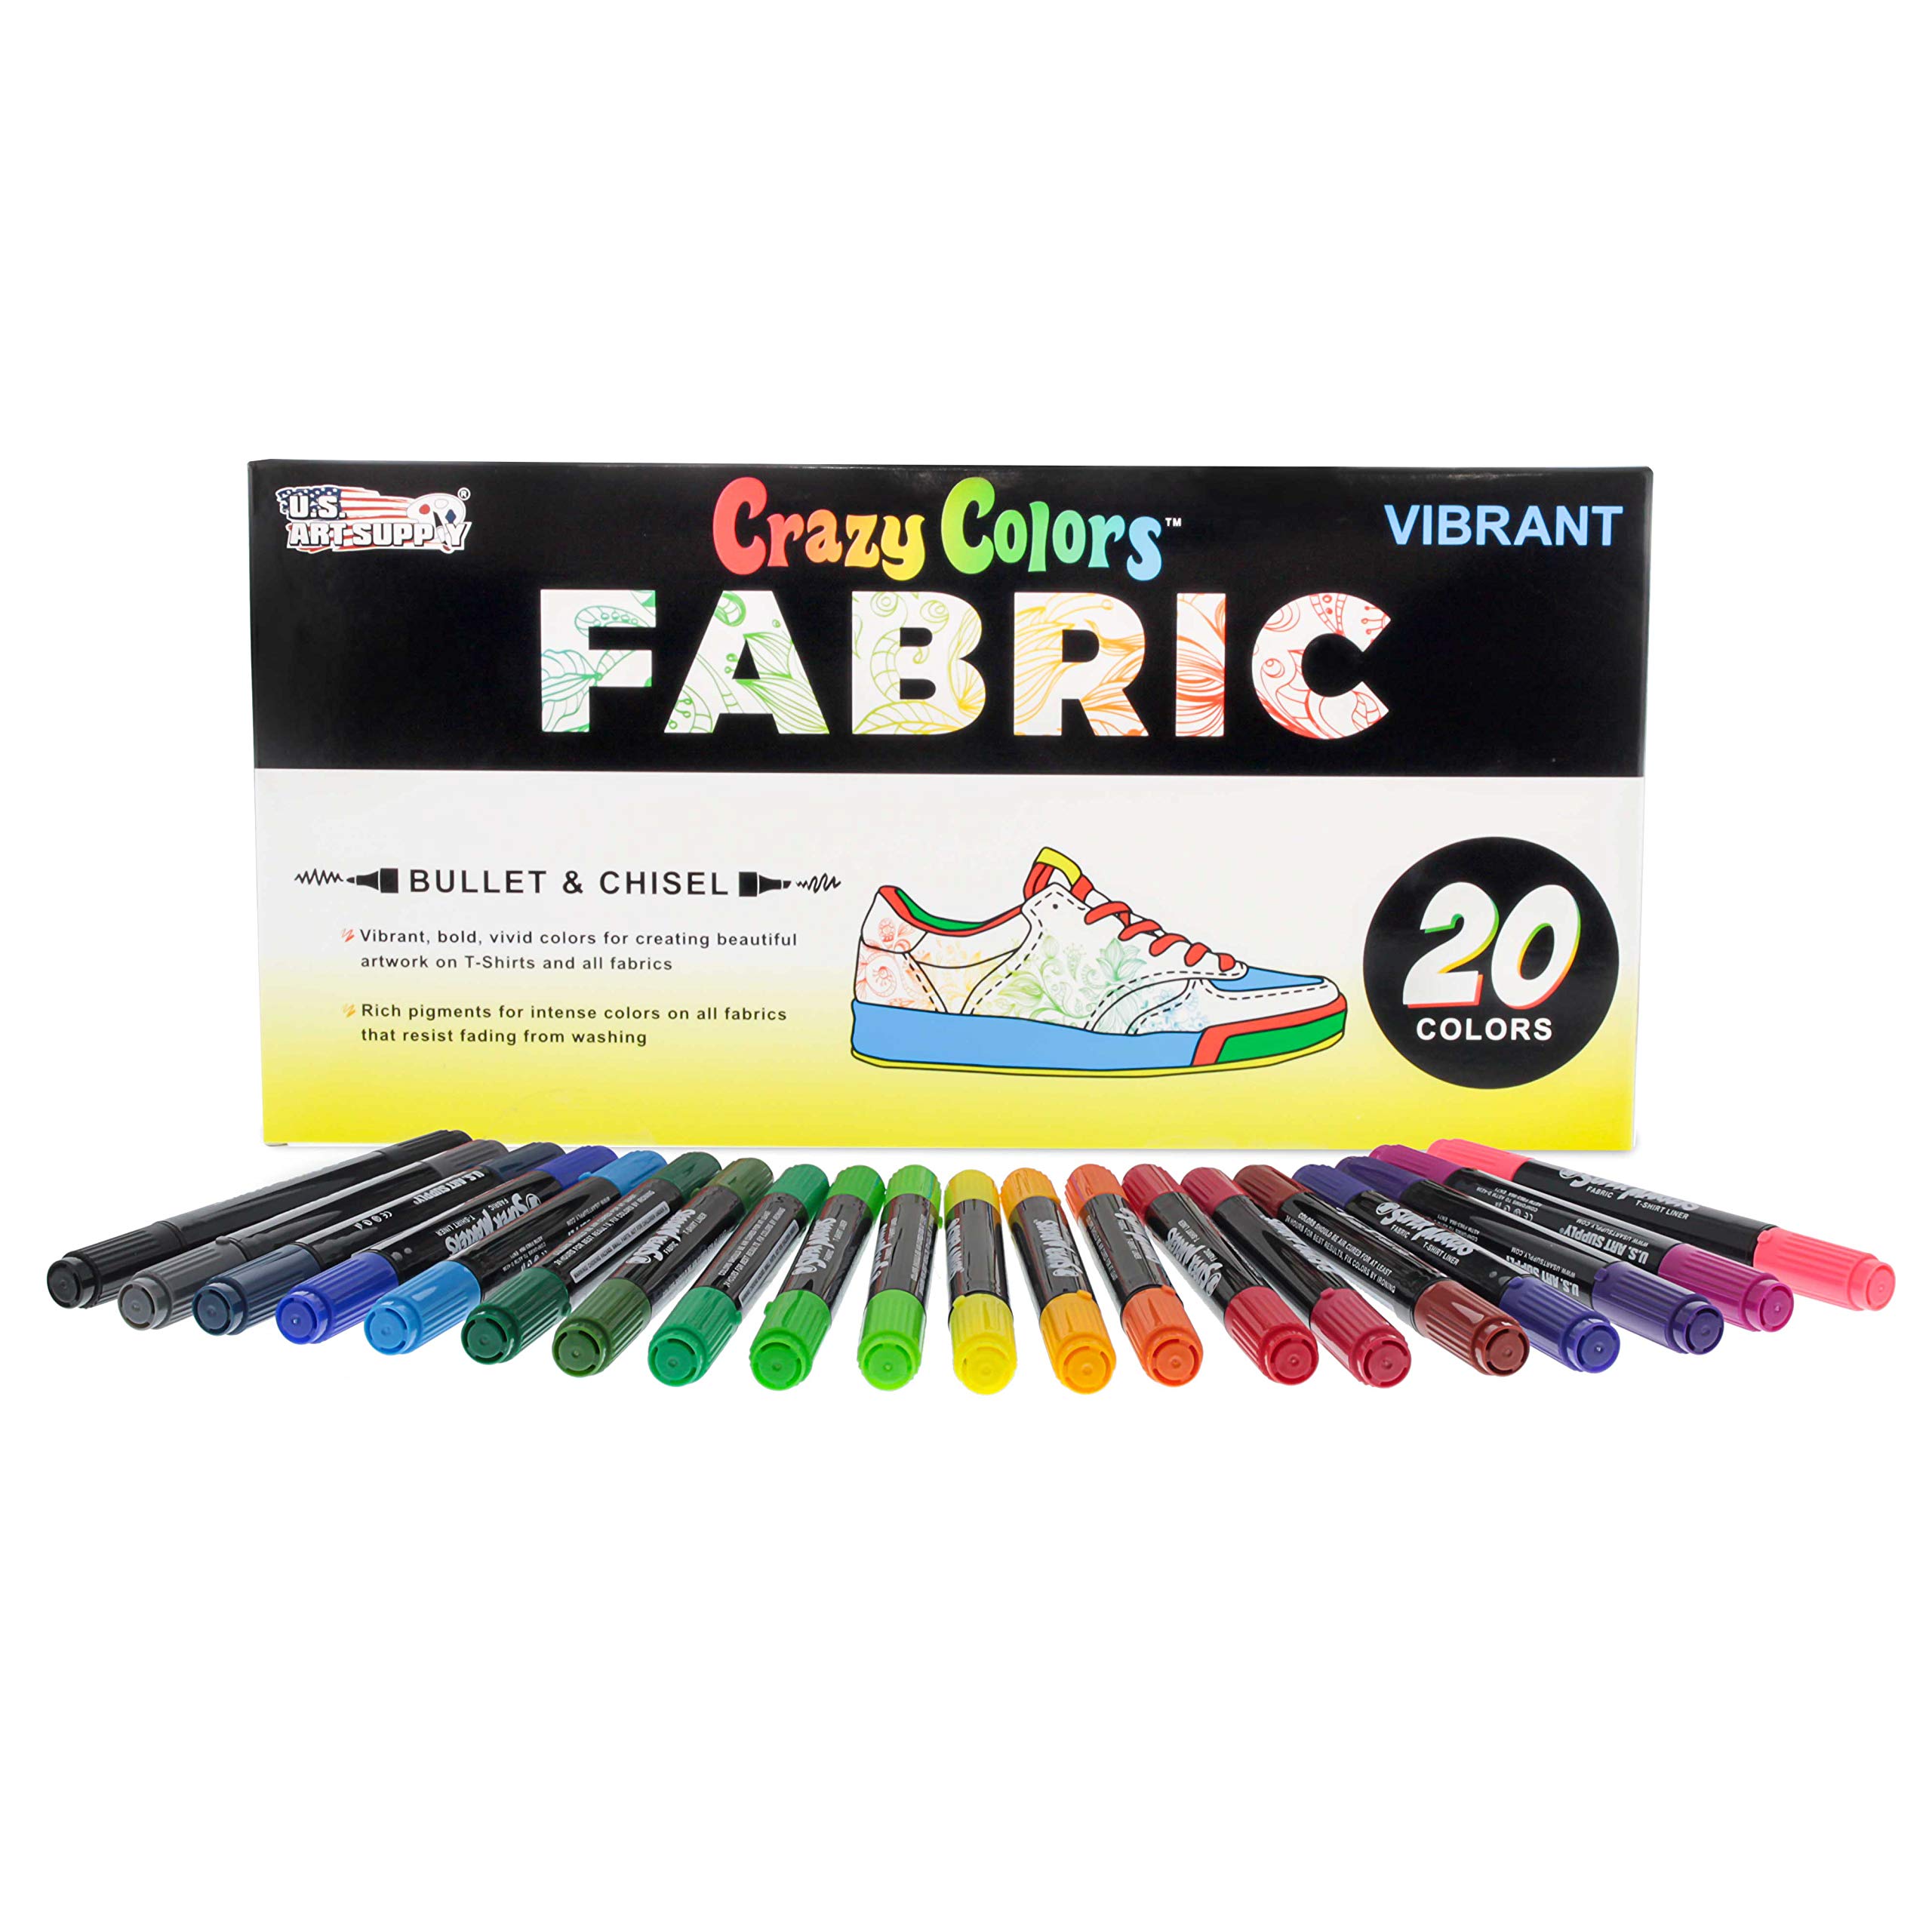 US Art Supply Super Markers 20 Unique Colors Dual Tip Fabric & T-Shirt Marker Set-Double-Ended Fabric Markers with Chisel Point and Fine Point Tips - 20 Permanent Ink Vibrant and Bold Colors